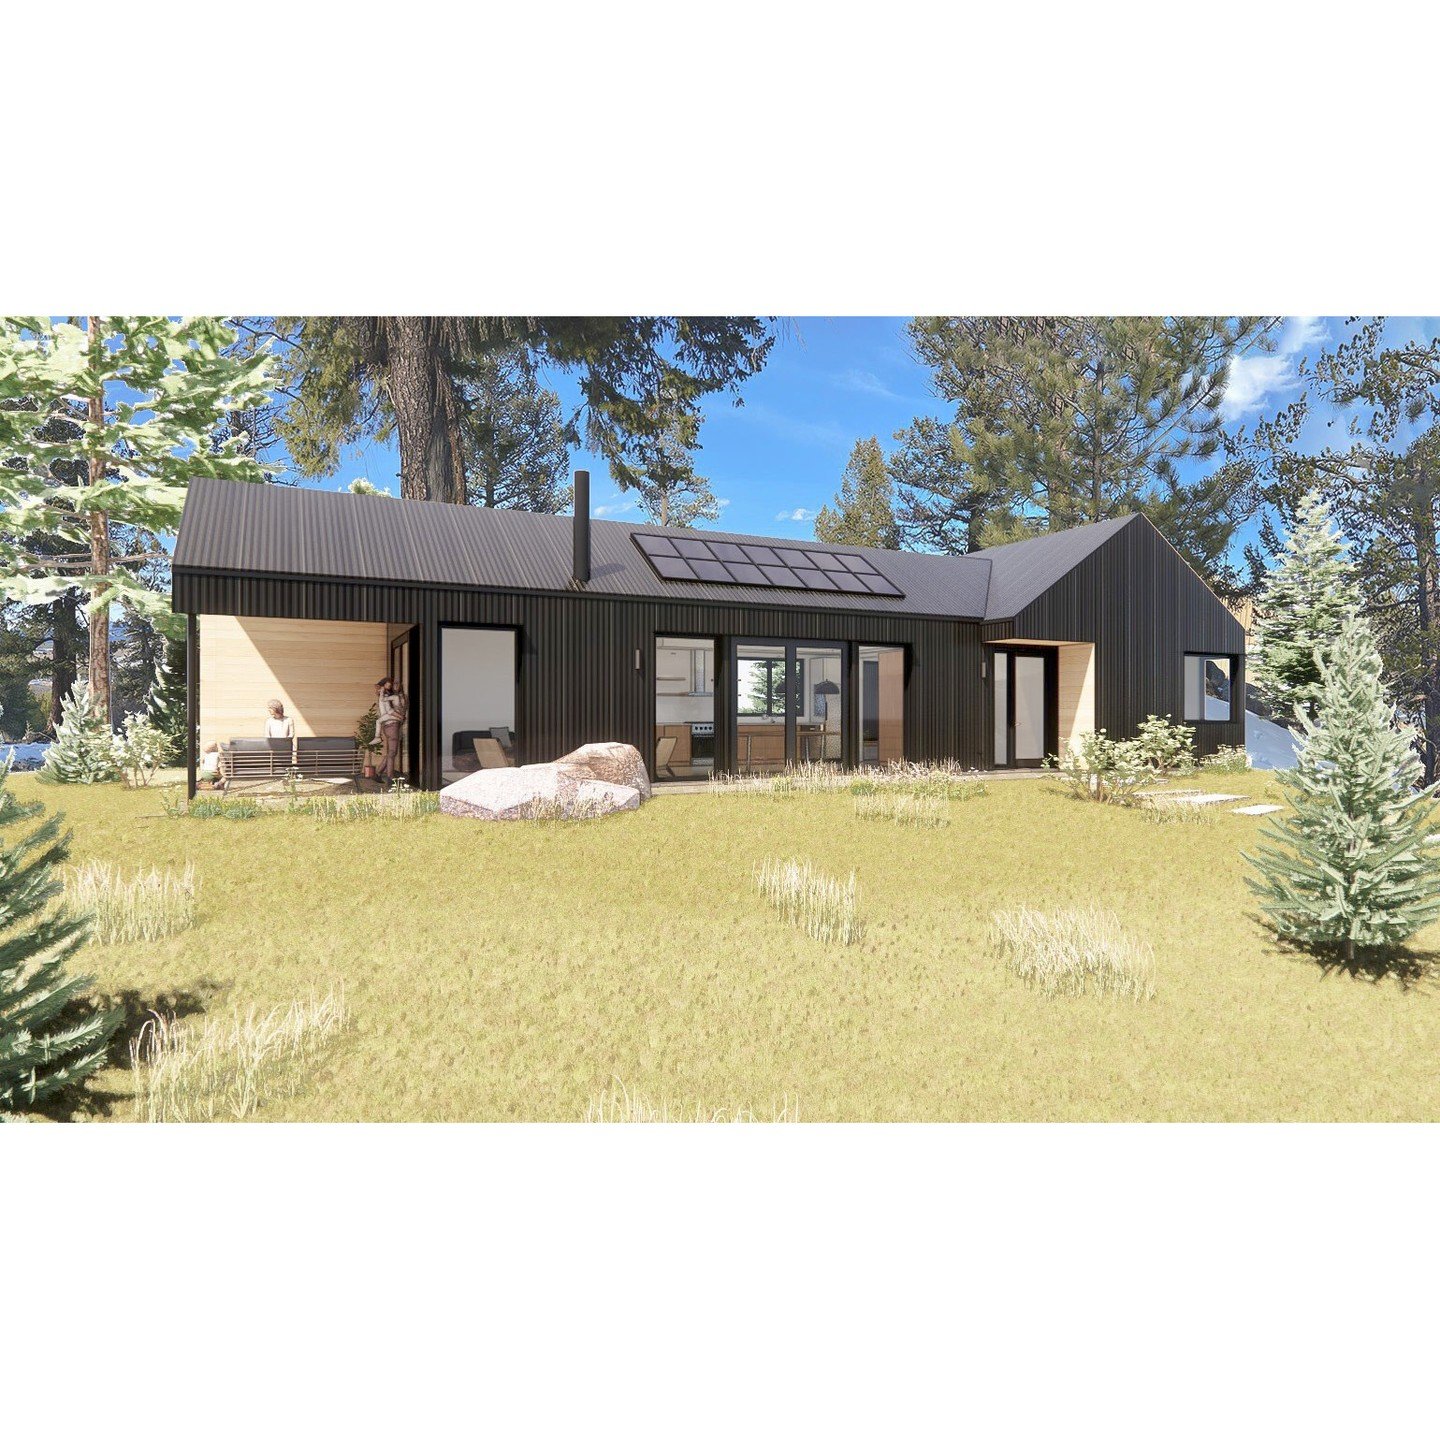 We're excited to be breaking ground on this high mountain &quot;Hytte&quot; with @kipconstruction

The hytte is meant to be a rustic place to get away from it all, with basic amenities for relaxing and great connection to the outdoors. The living vol